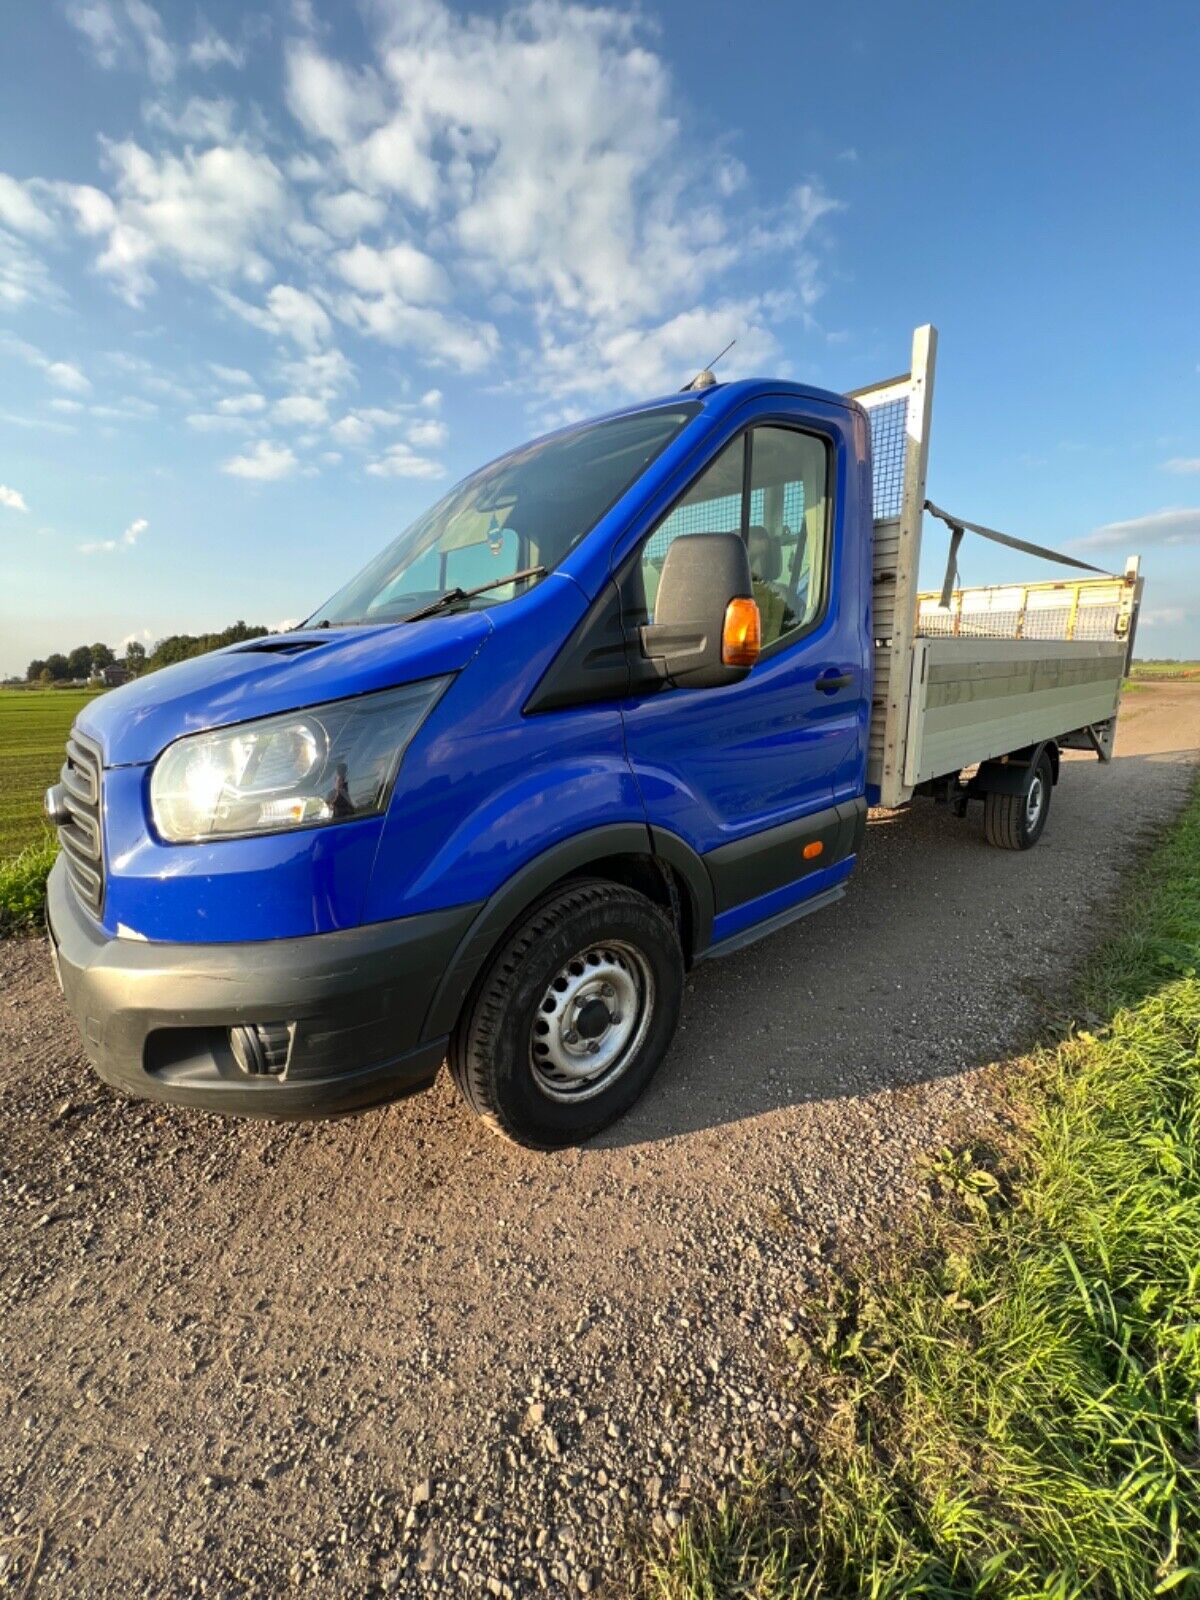 Bid on 2017 FORD TRANCIT FLAT BED EURO6 1 ONWER- Buy &amp; Sell on Auction with EAMA Group